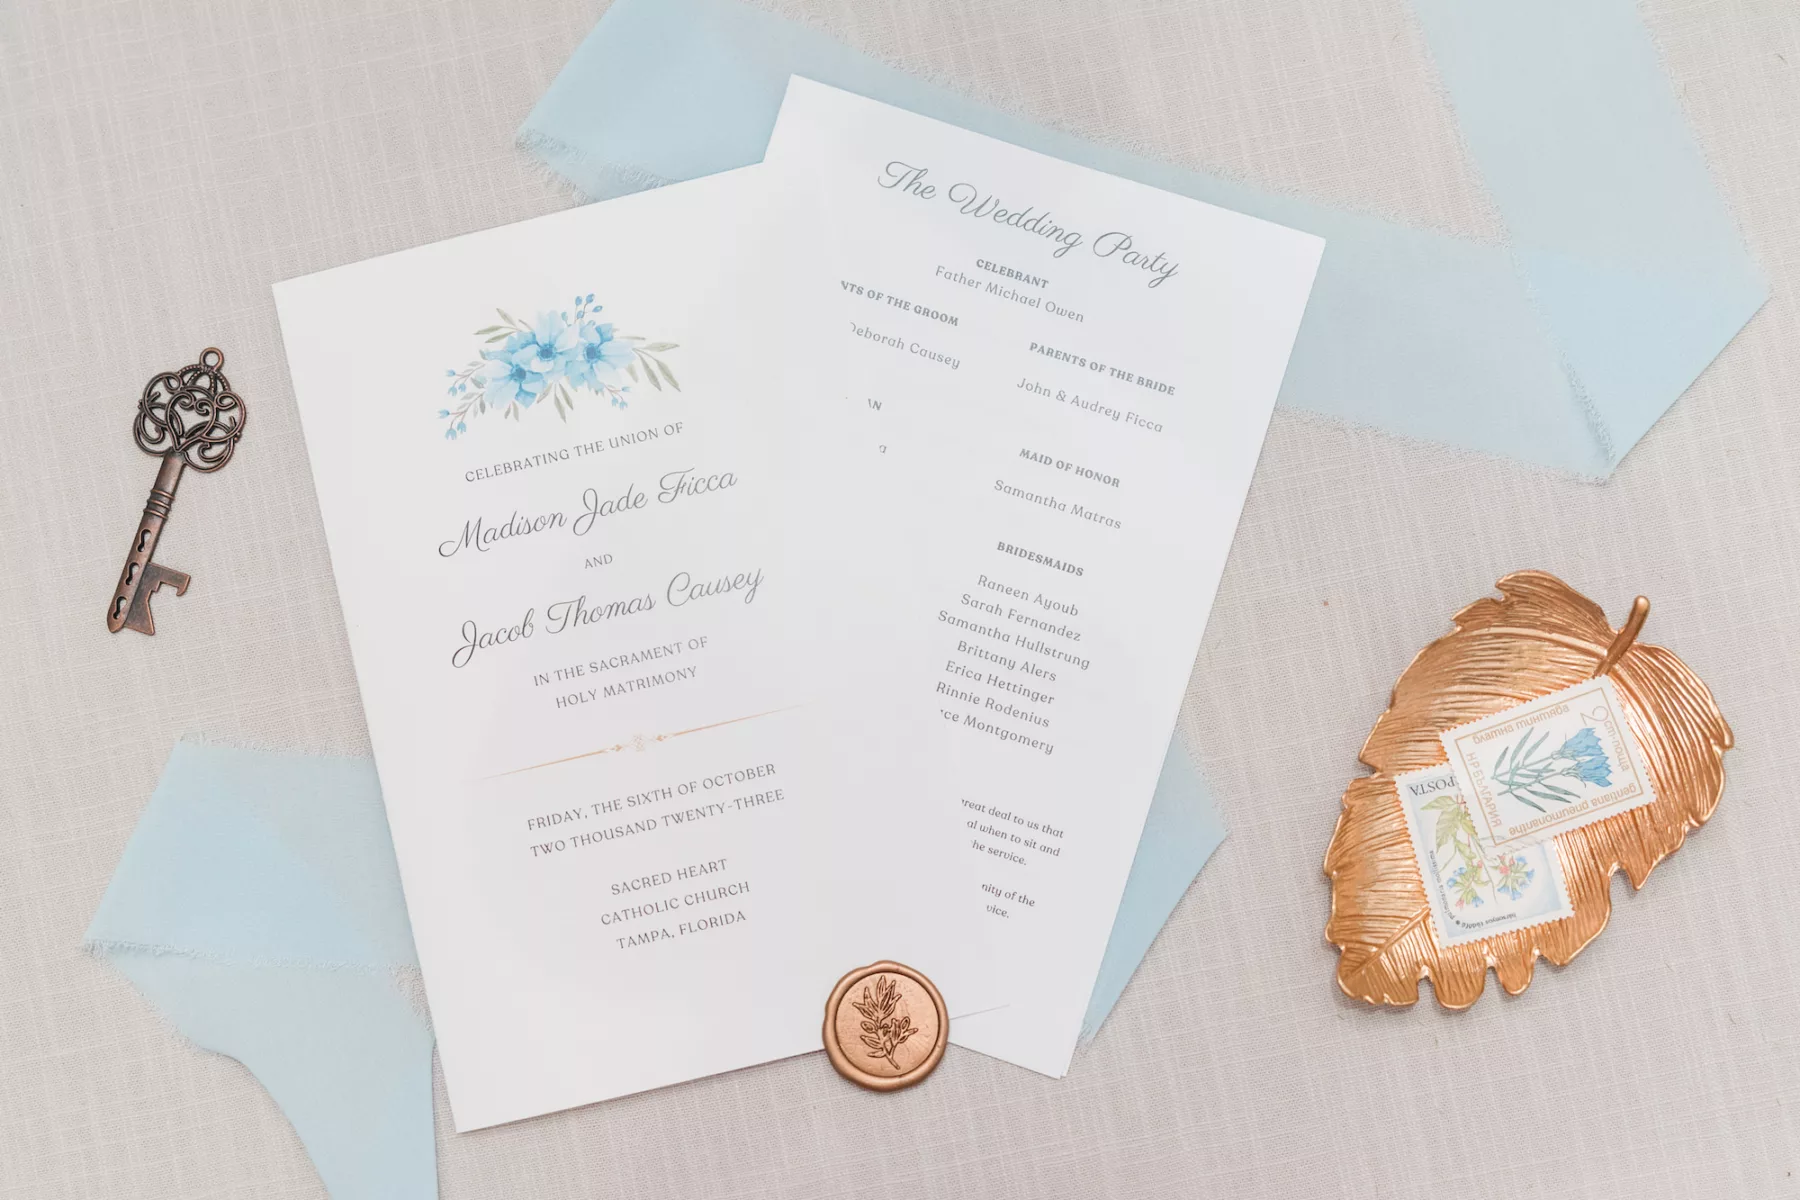 Classic Spring Light Blue and White Garden Inspired Wedding Invitation Suite Ideas